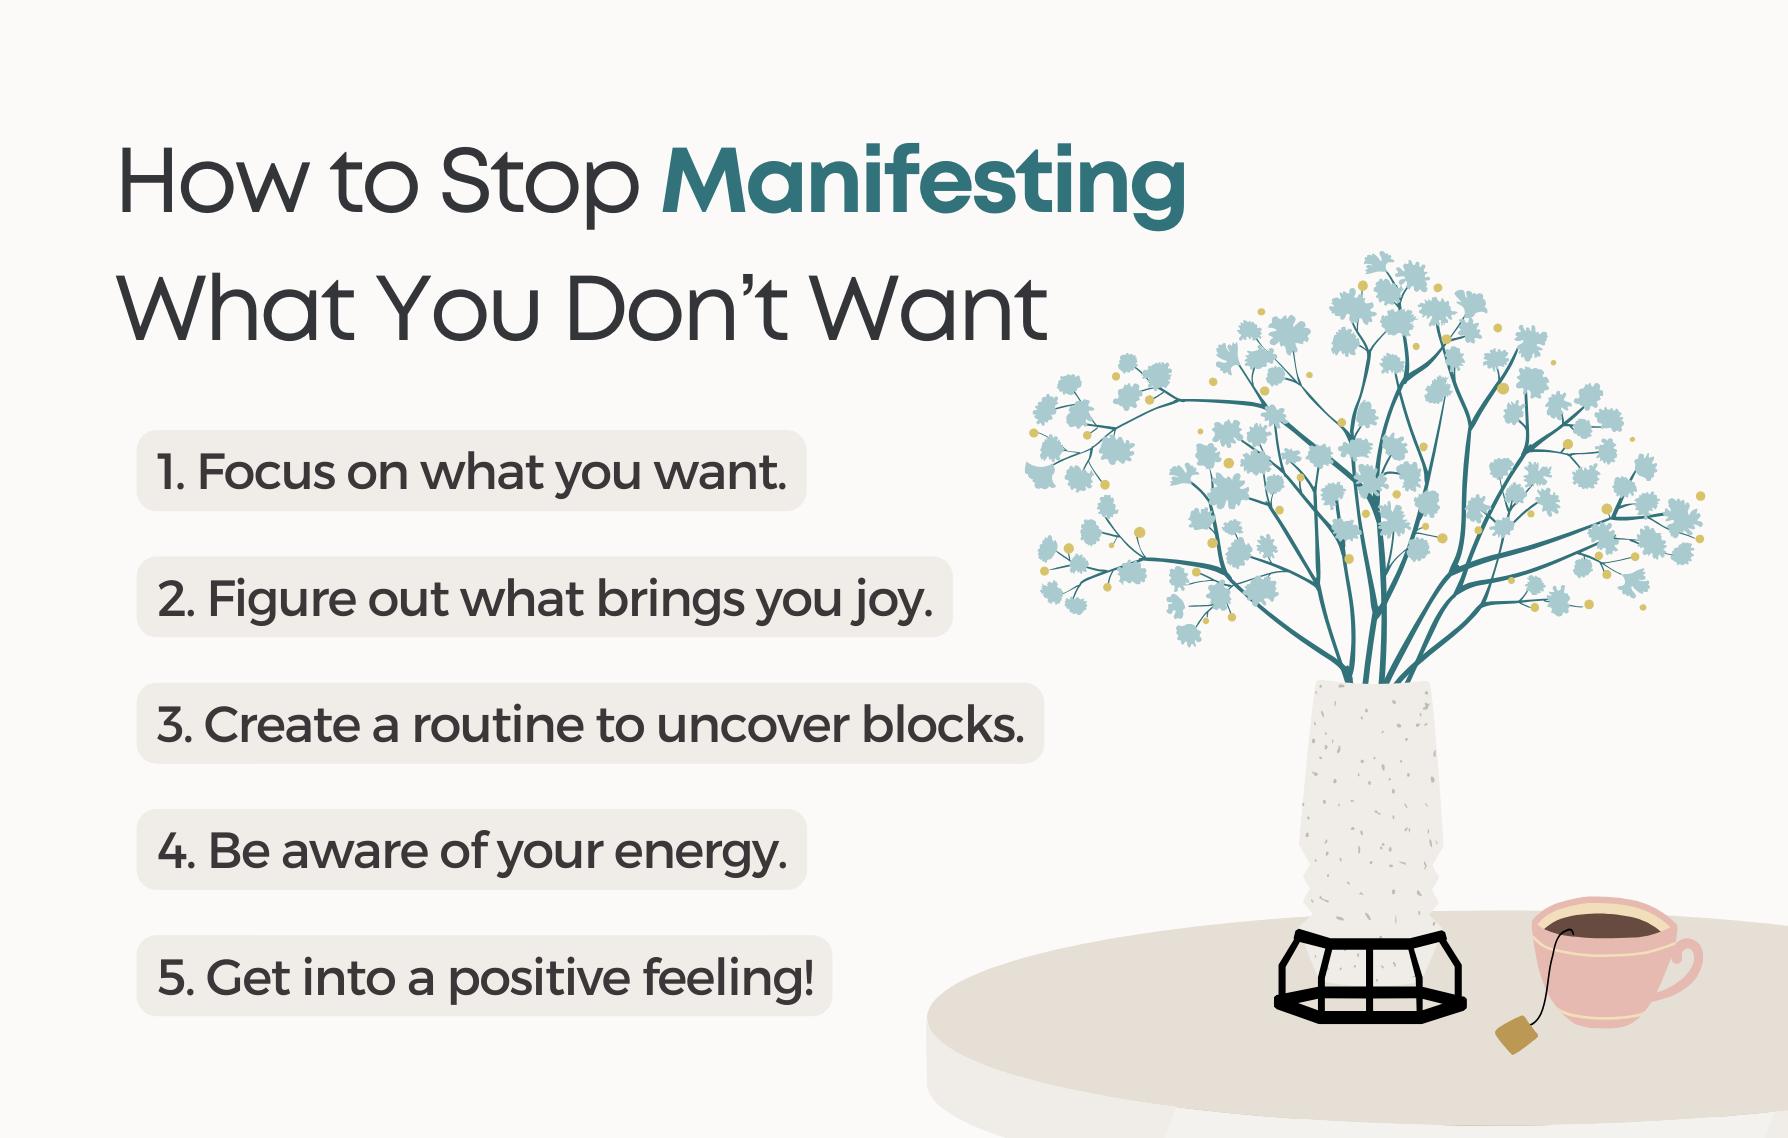 How To Stop Manifesting What You Don’t Want